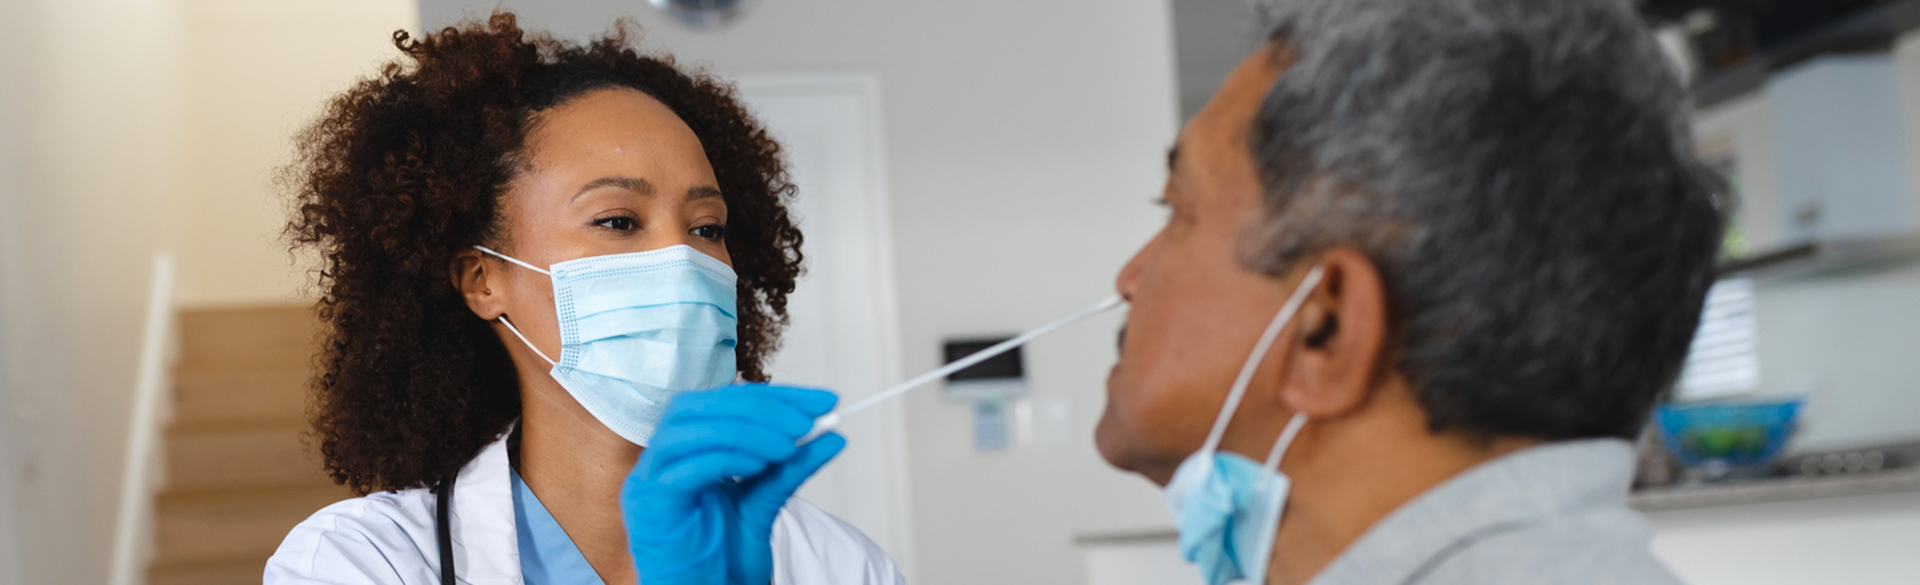 A masked and gloved healthcare provider begins a nasal swab on a patient for a COVID test